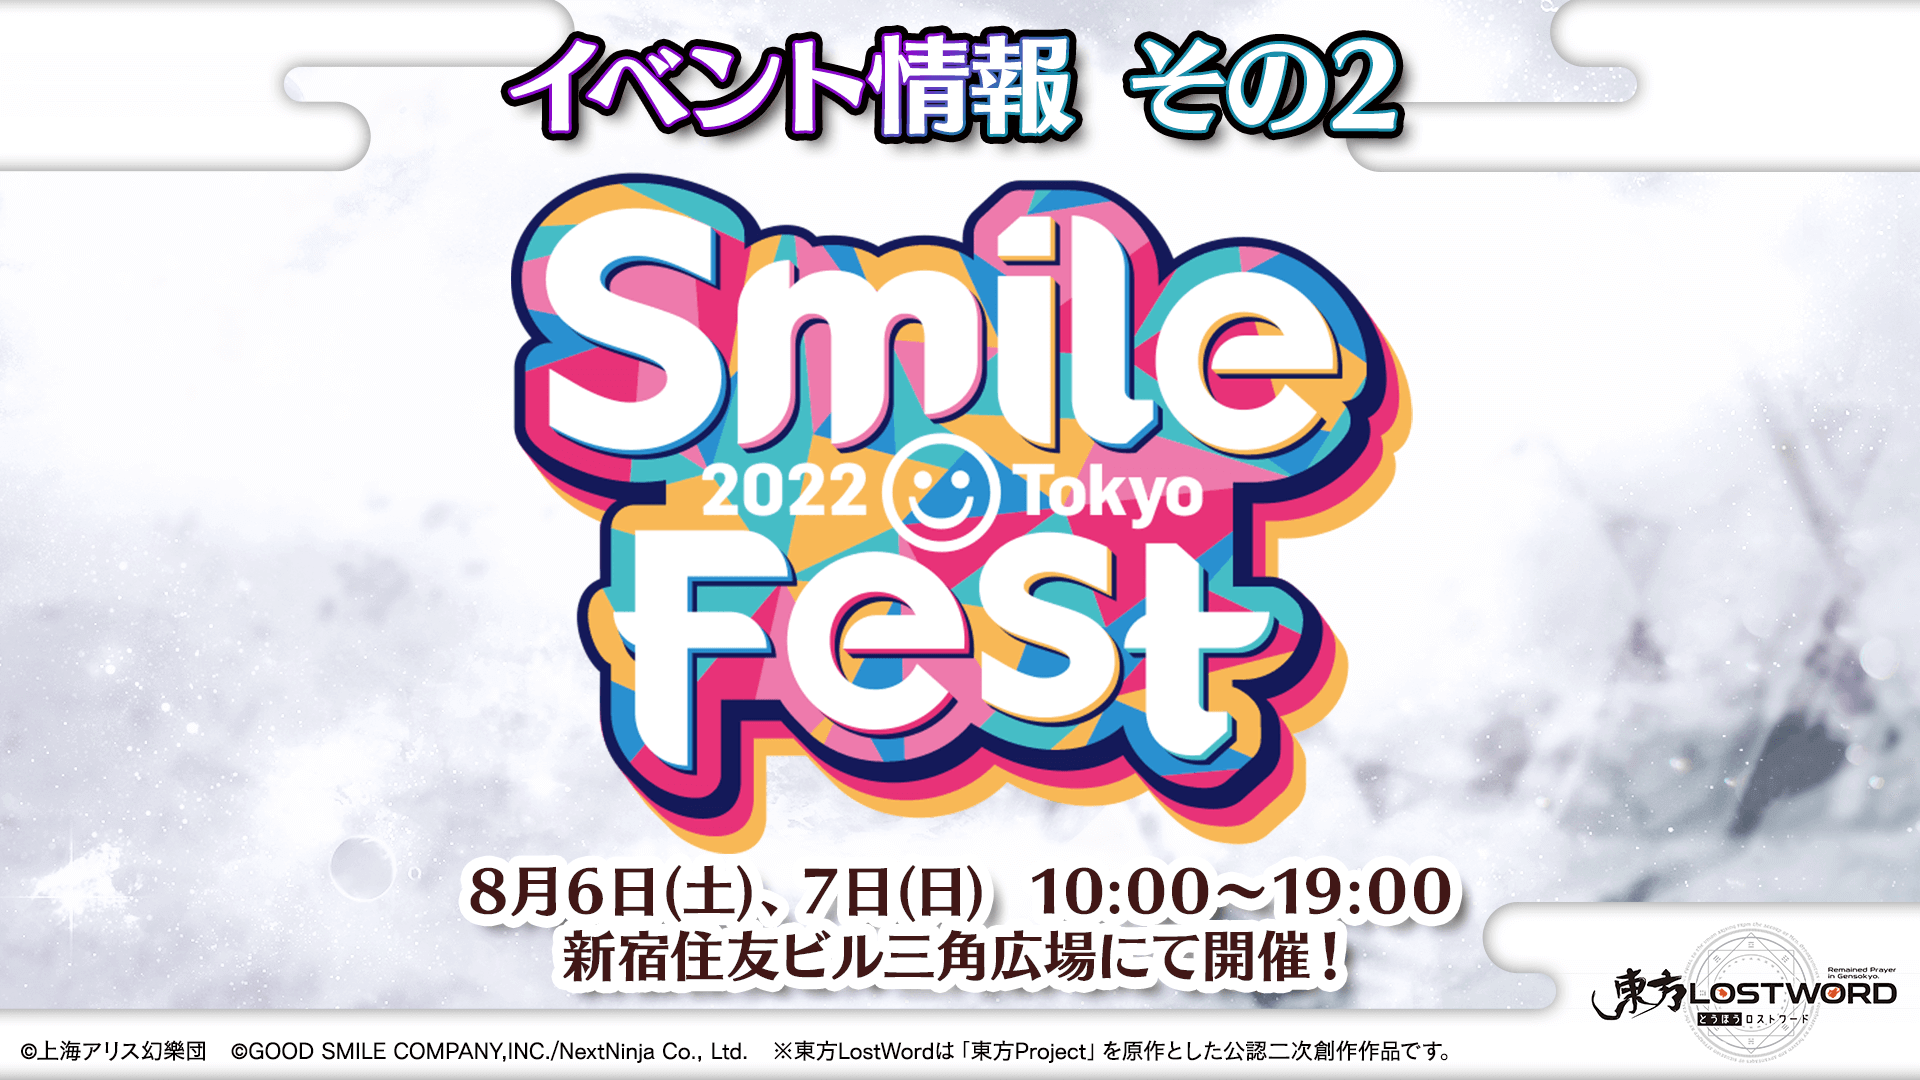 SmileFest, Shinjuku Sumitomo Building Triangle Square from 10:00 to 19:00 on Sat. August 6th and 7th.